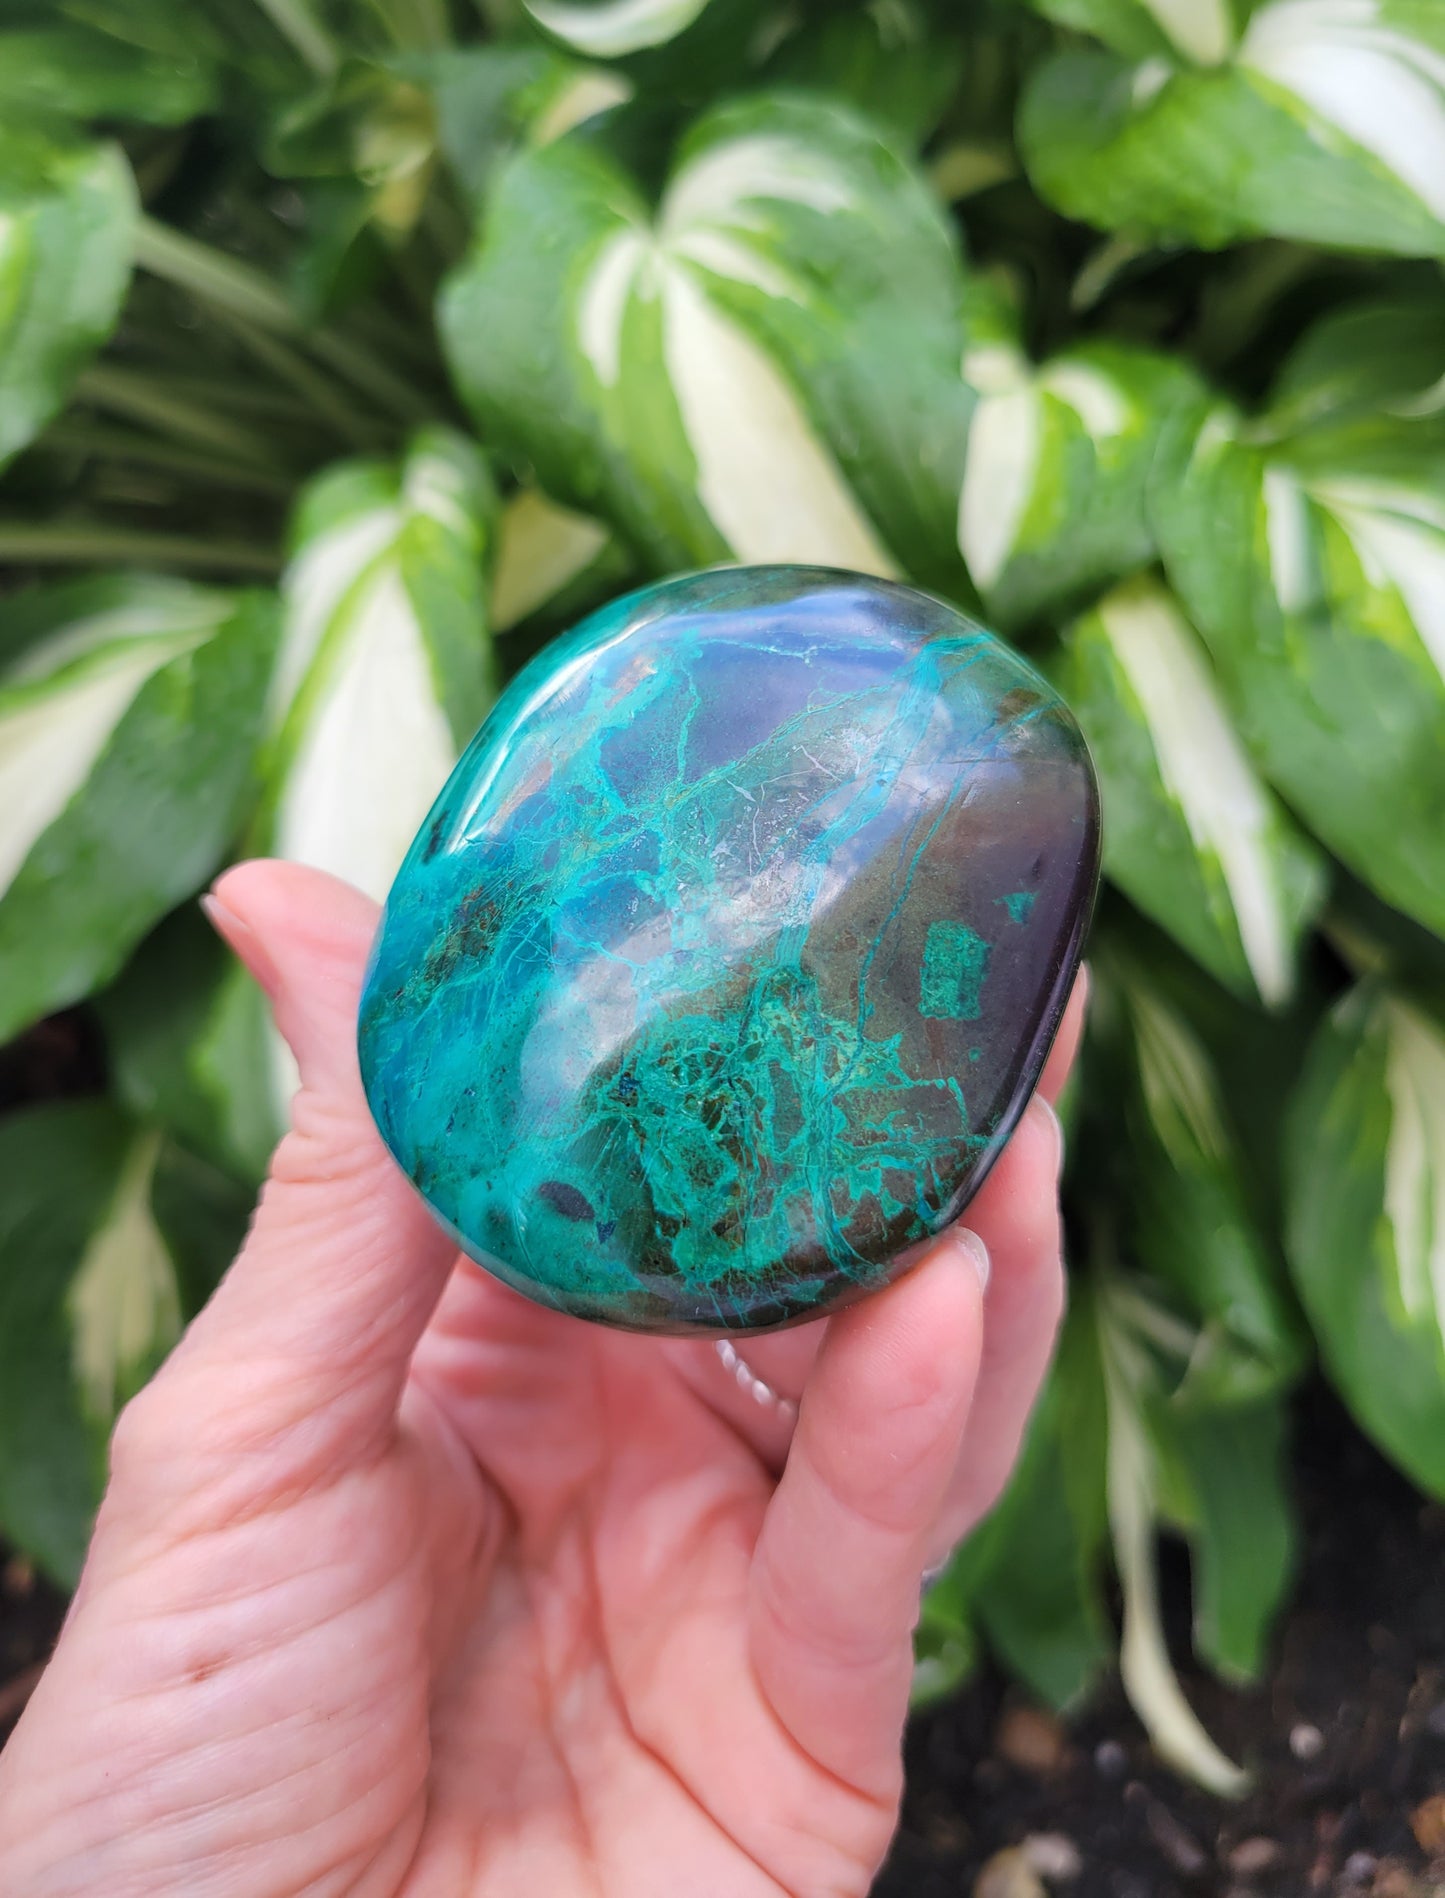 Chrysocolla Polished Palm Stone from Peru (2 1/8 X 1 X 3 3/4 inches)